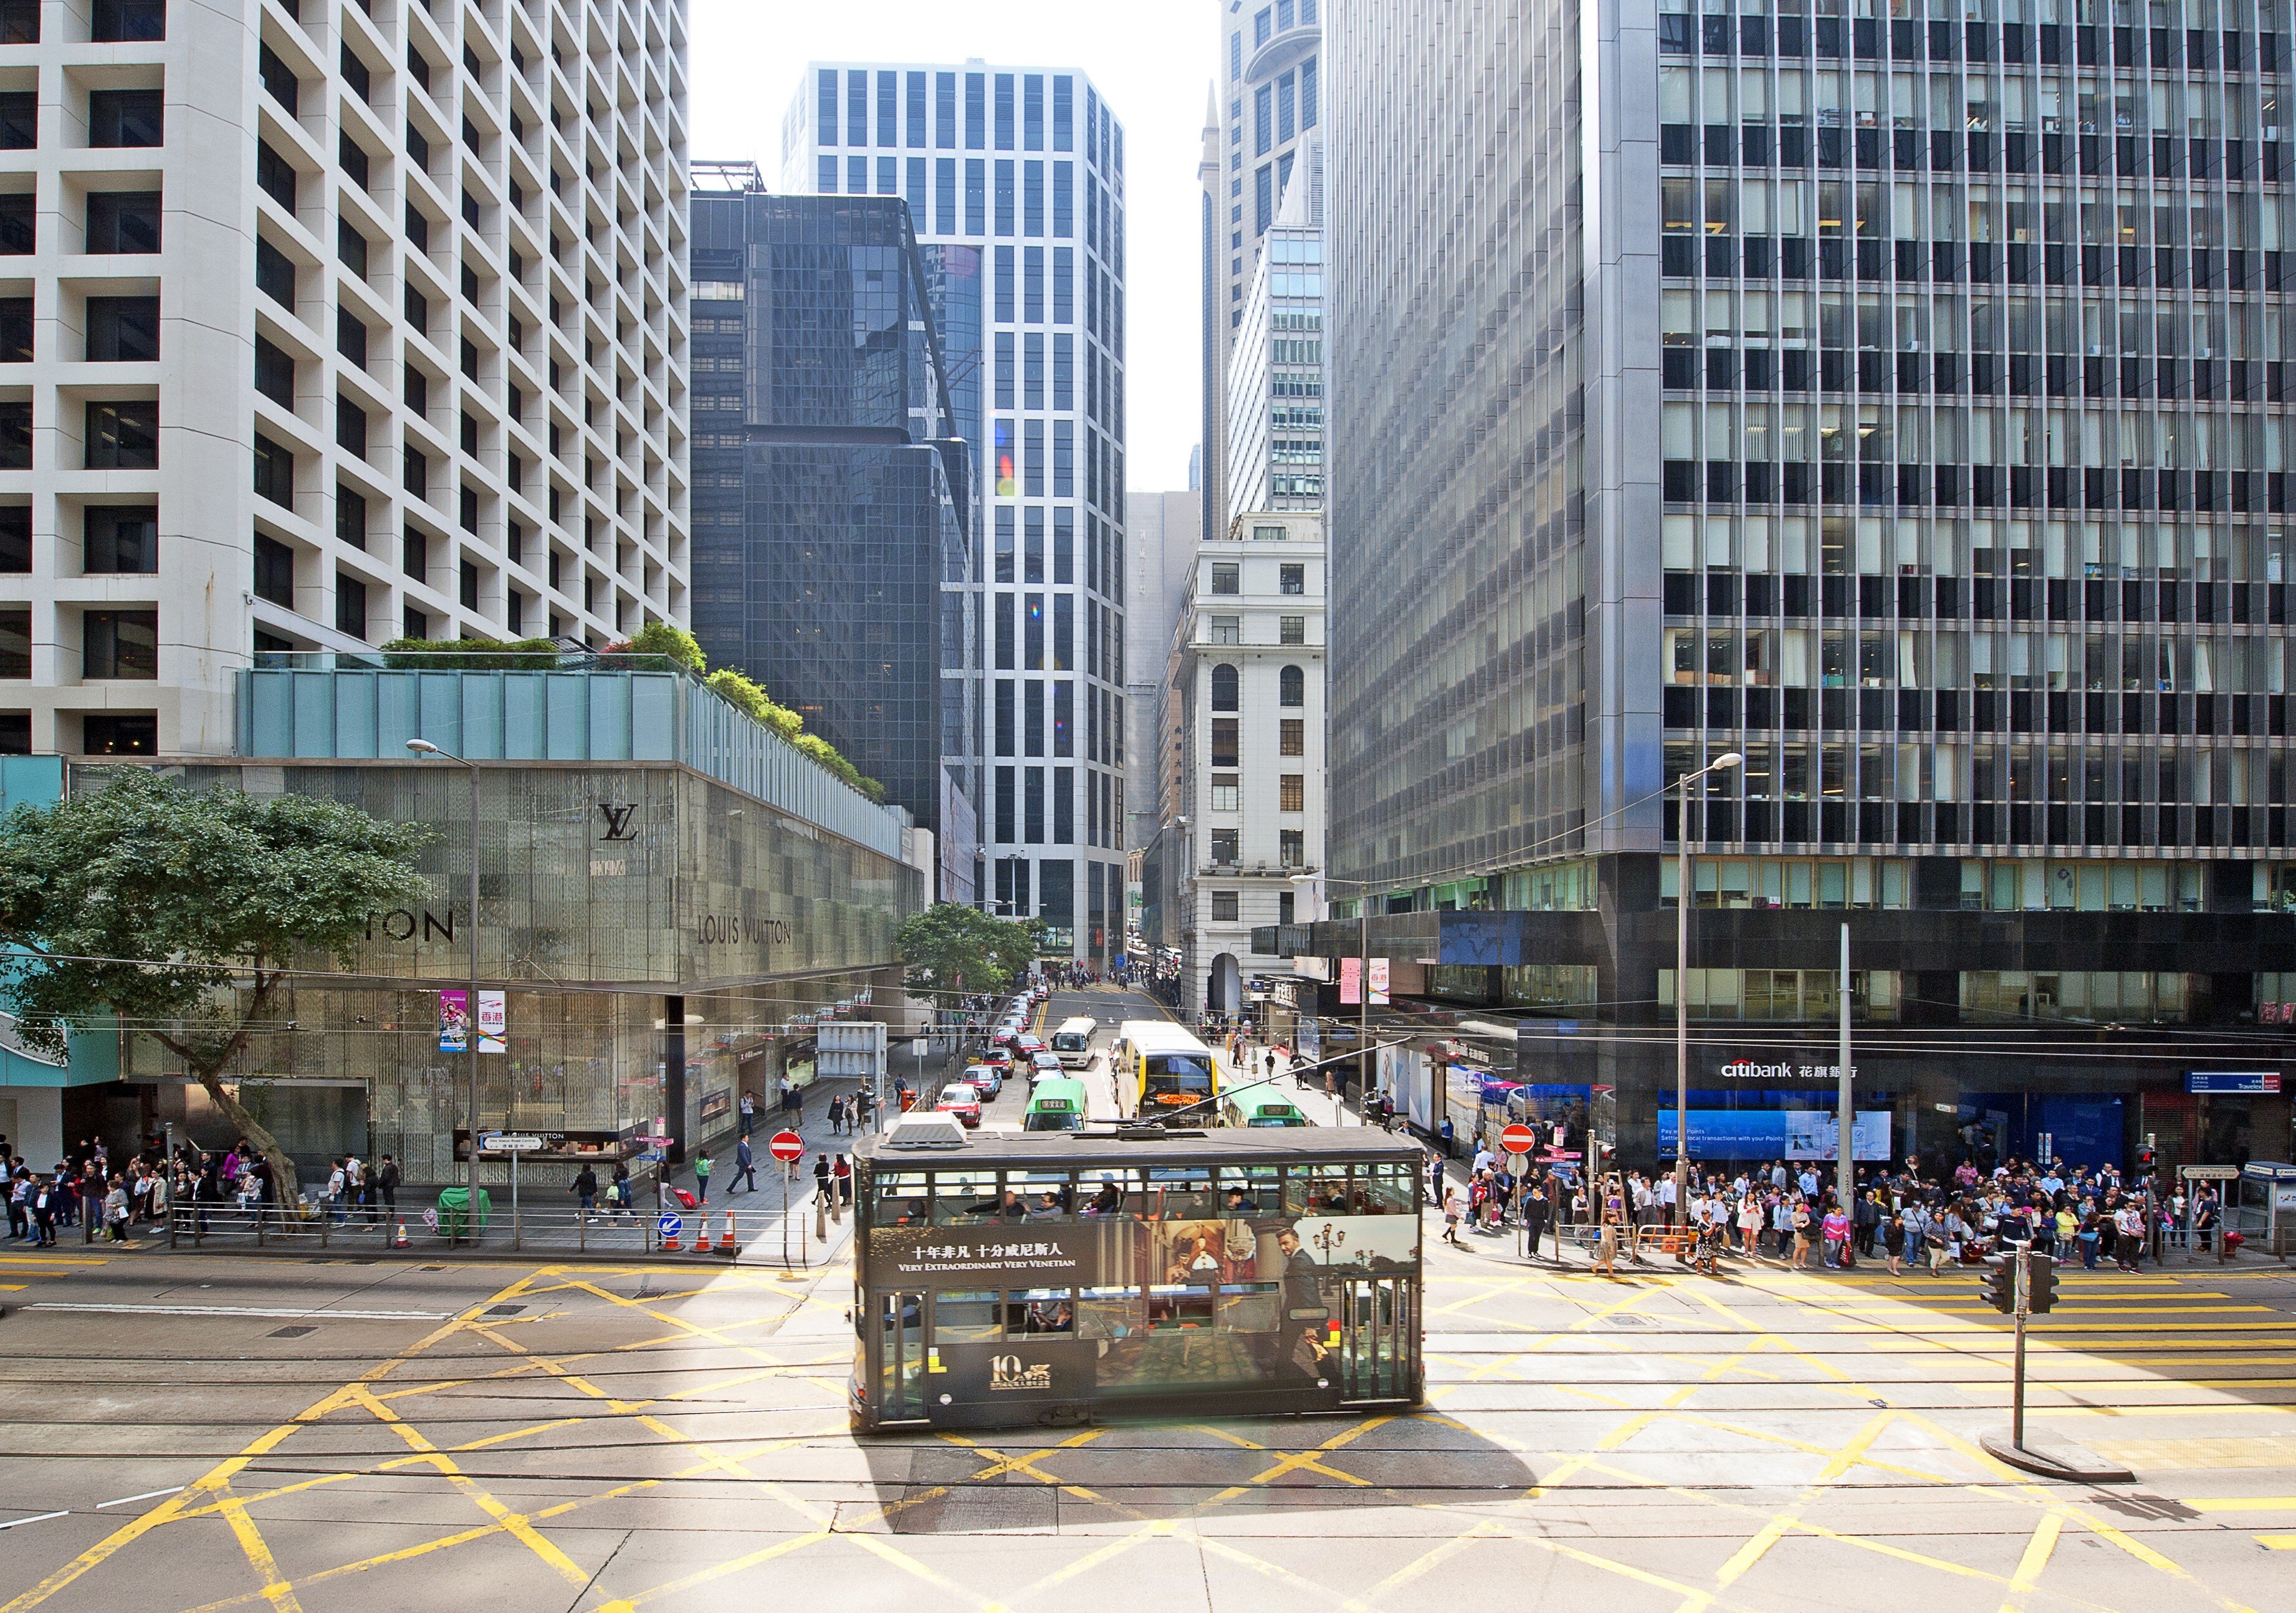 An iconic heritage double-decker tram passes a street junction in Central as it rides down the tramlines in the dedicated central reservation between high-rise skyscrapers in this street scene cityscape of the shopping and business district, Hong Kong Island. Photo: Getty Images